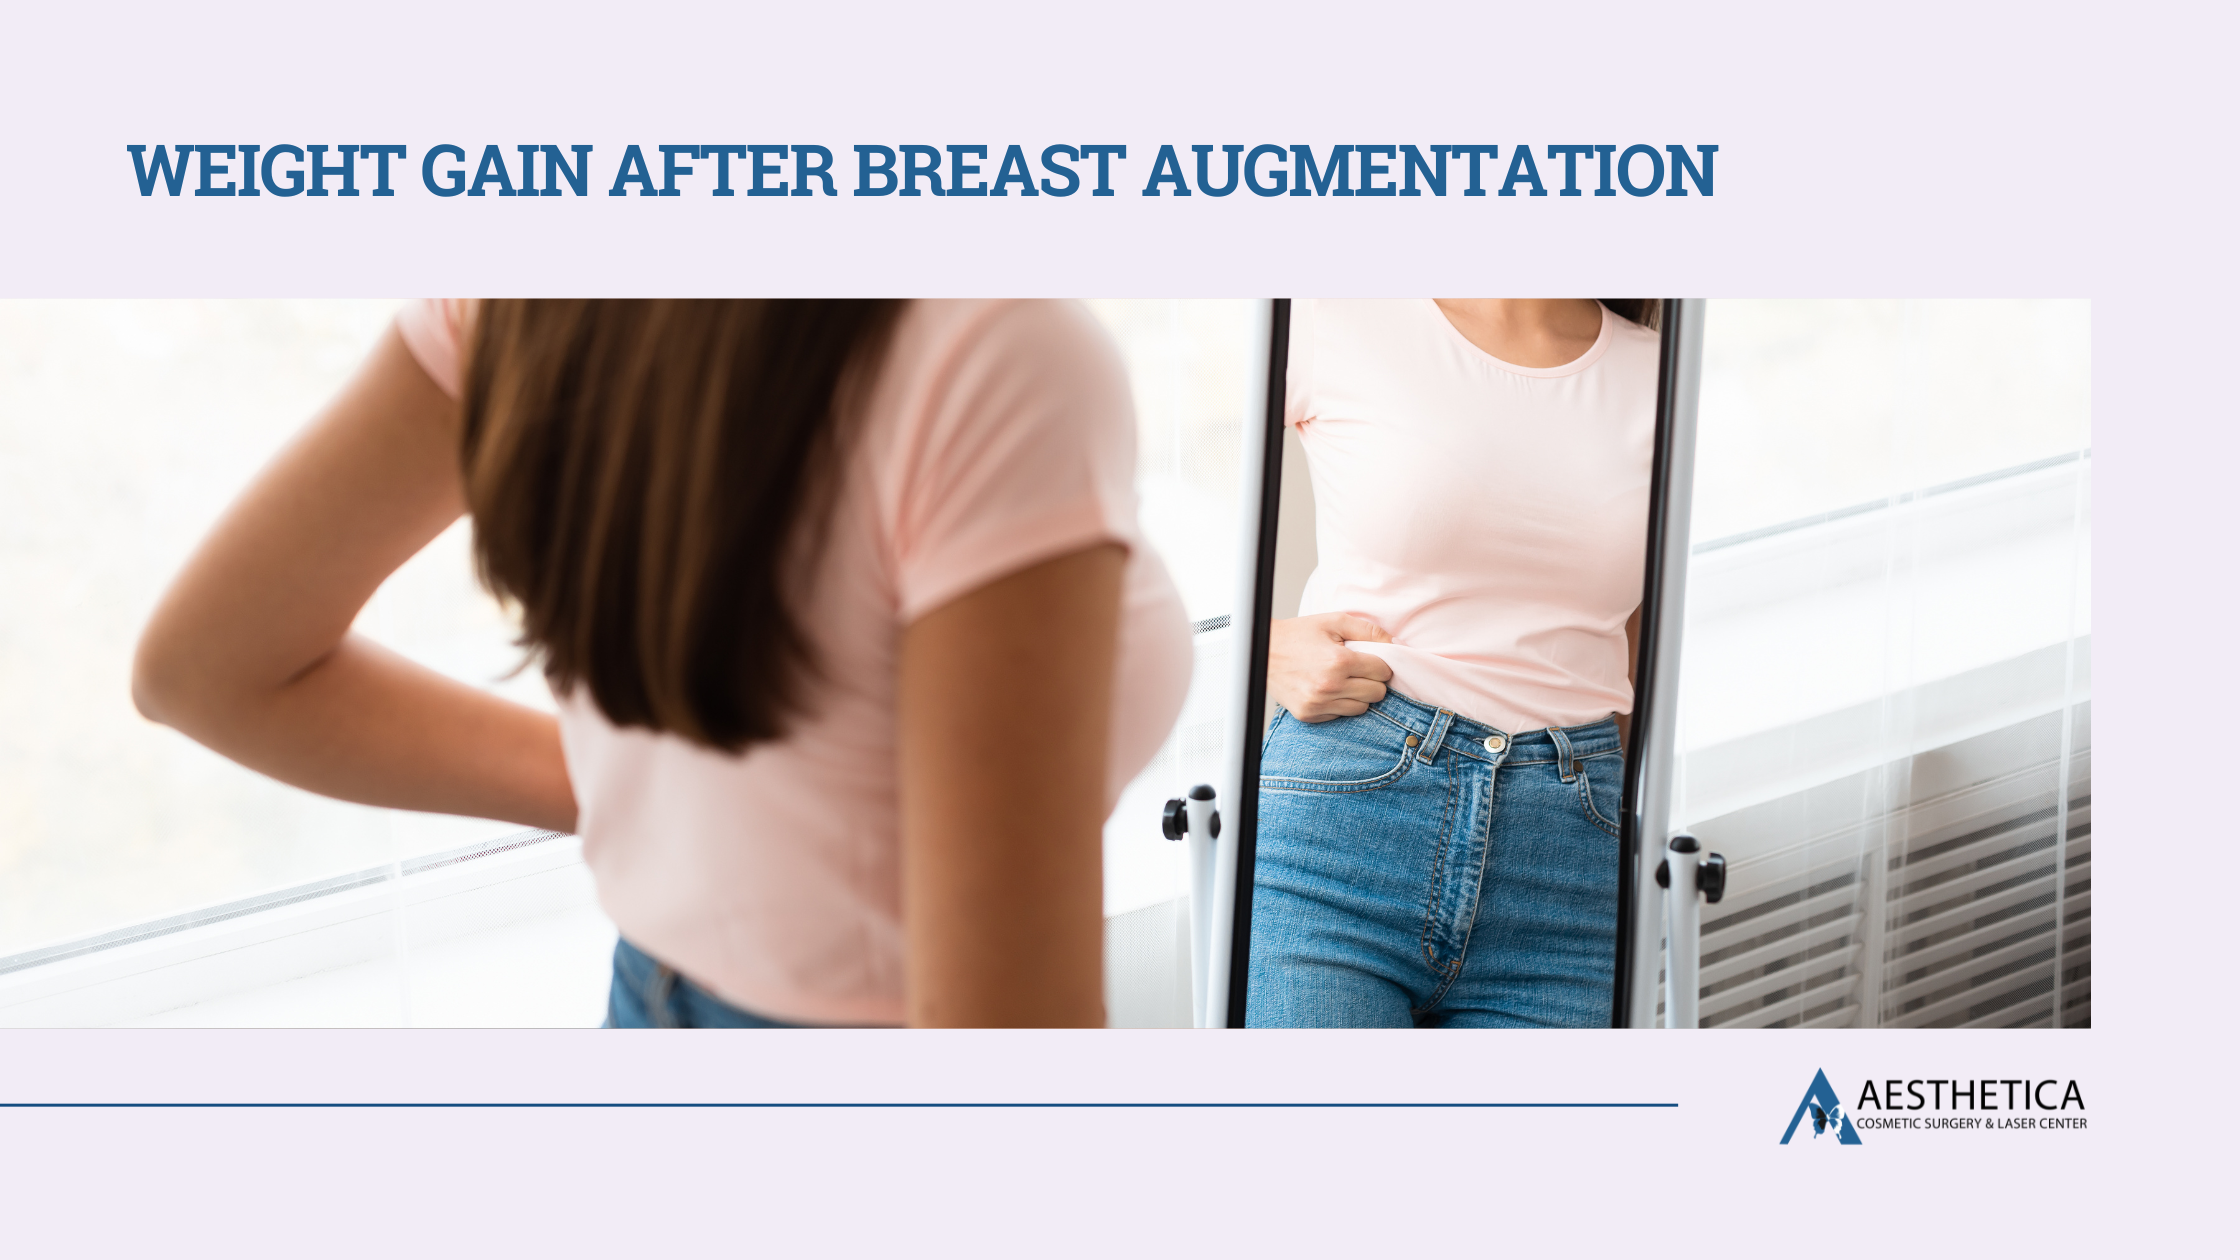 Can Breast Implants Cause Weight Gain?